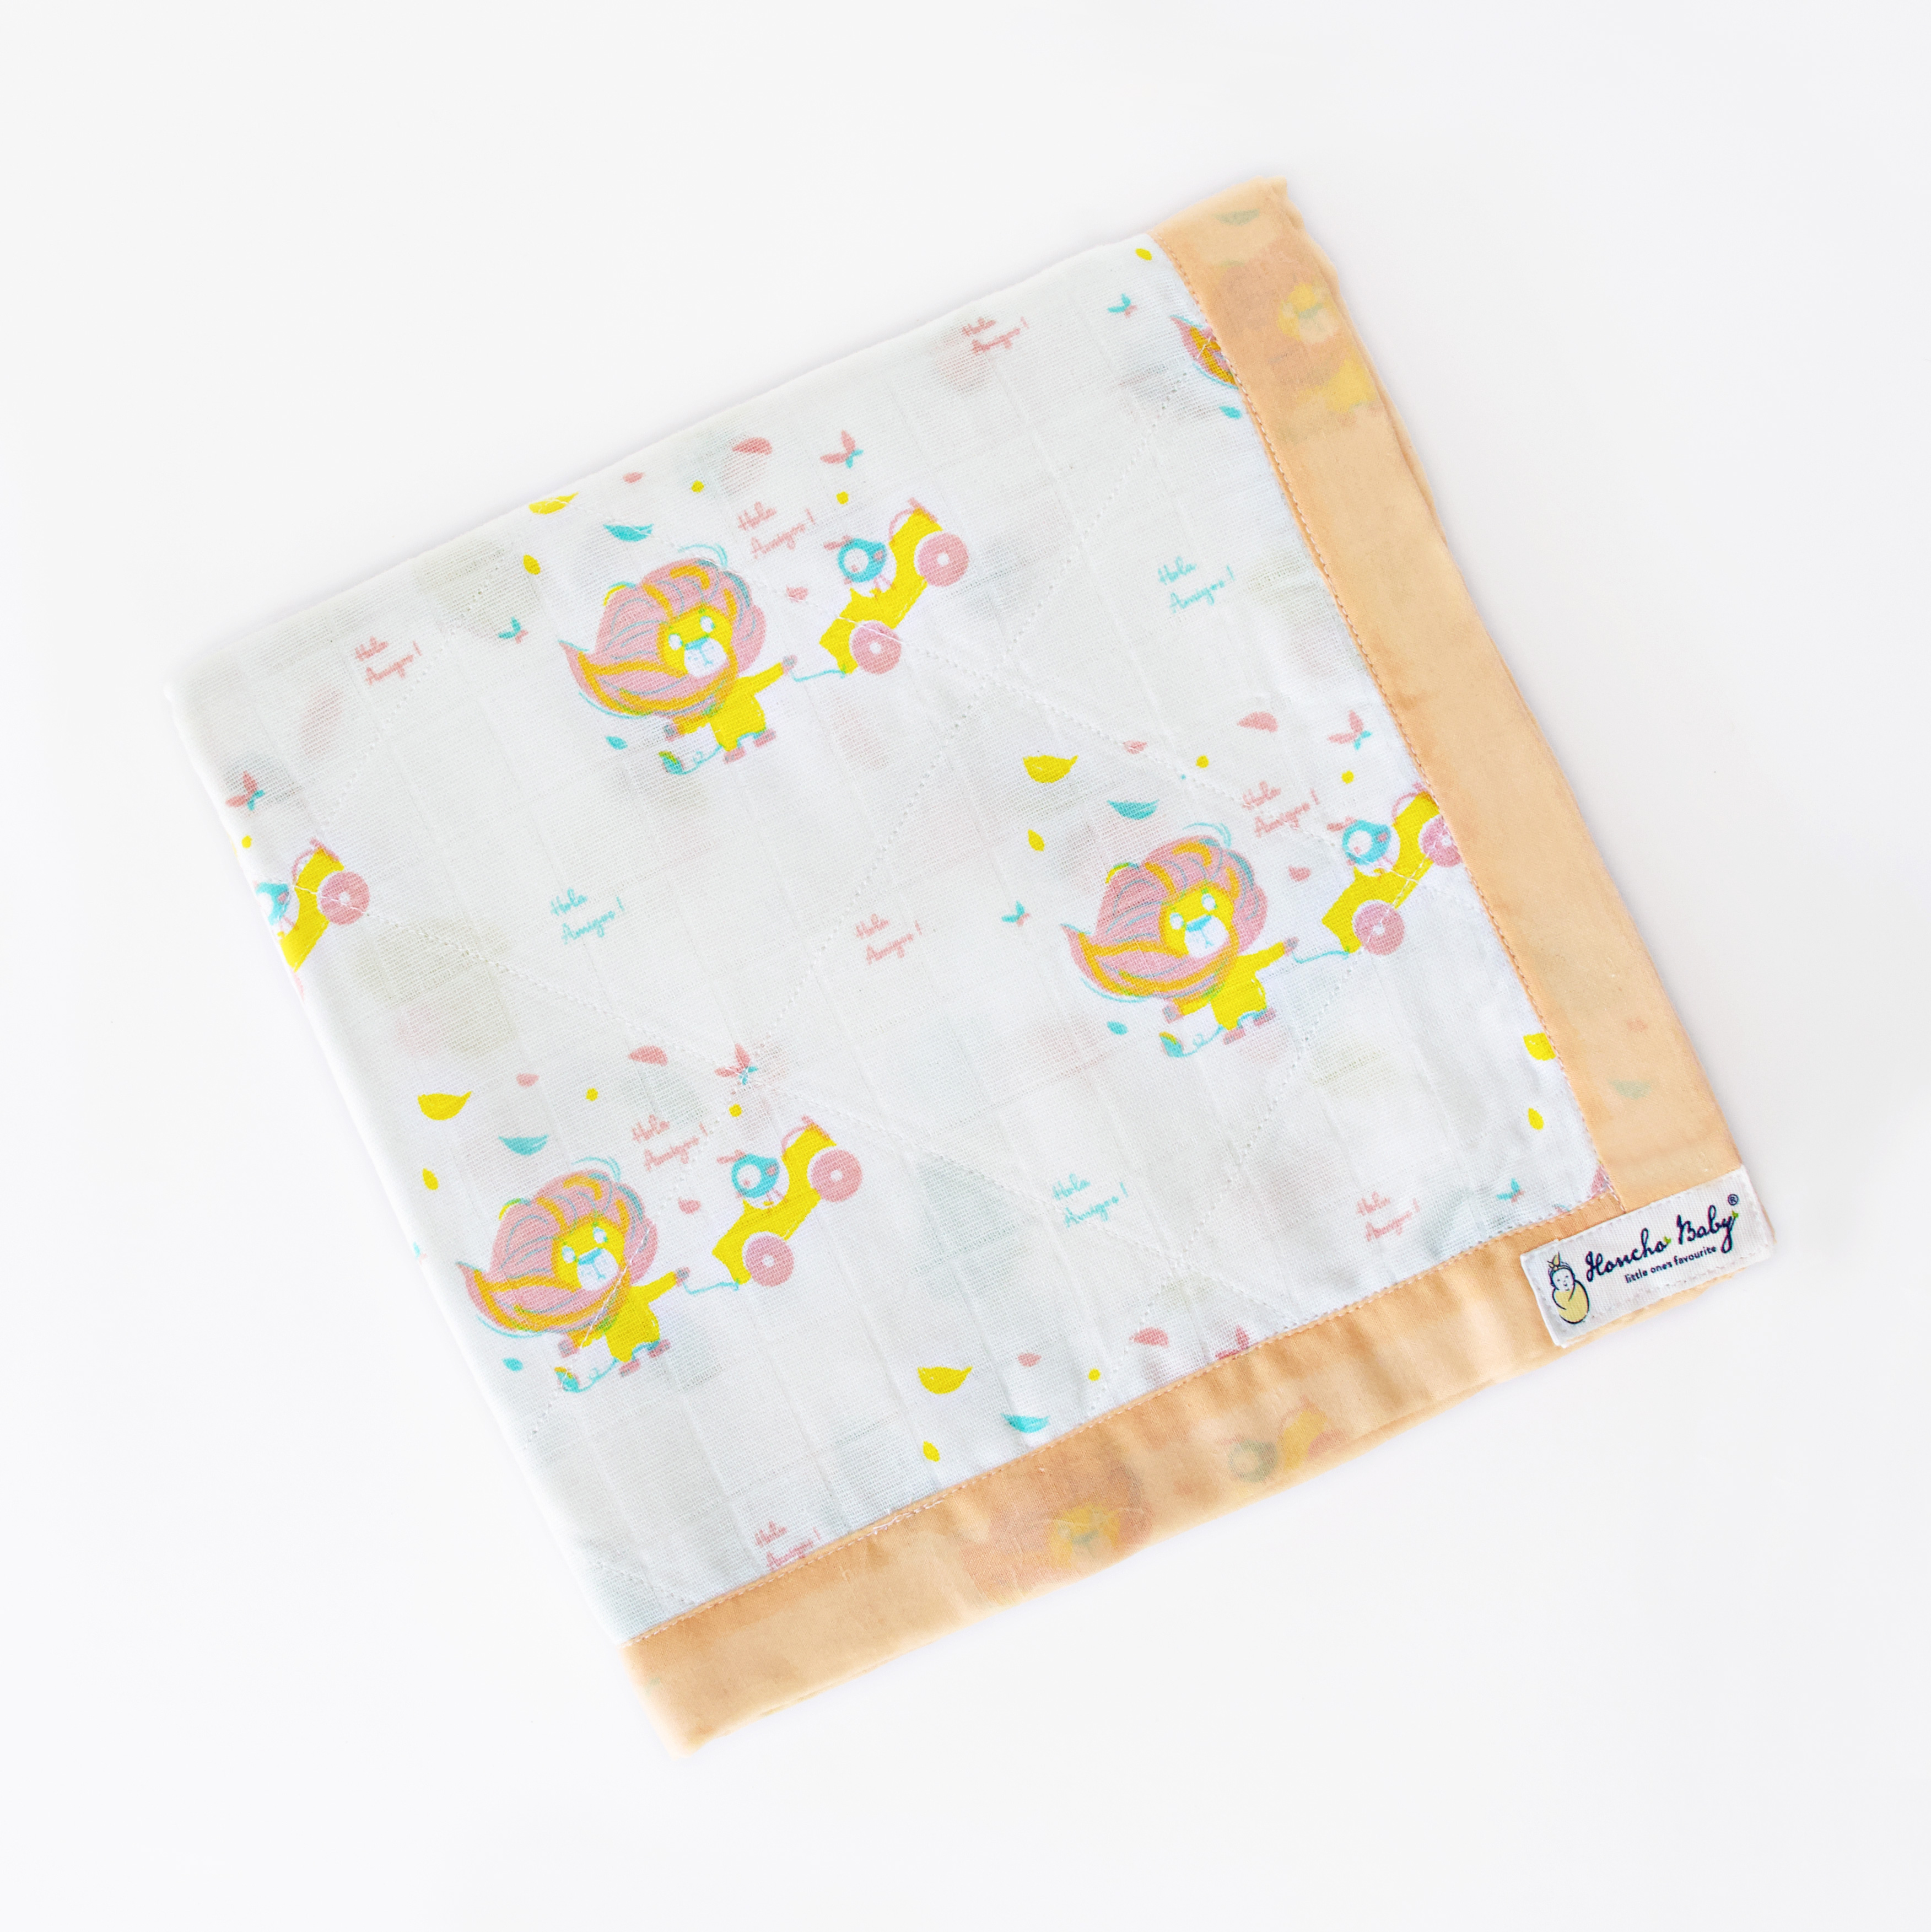 Tropical Magic & Lion and Bird in the wind - Reversible Blanket - 4 layered